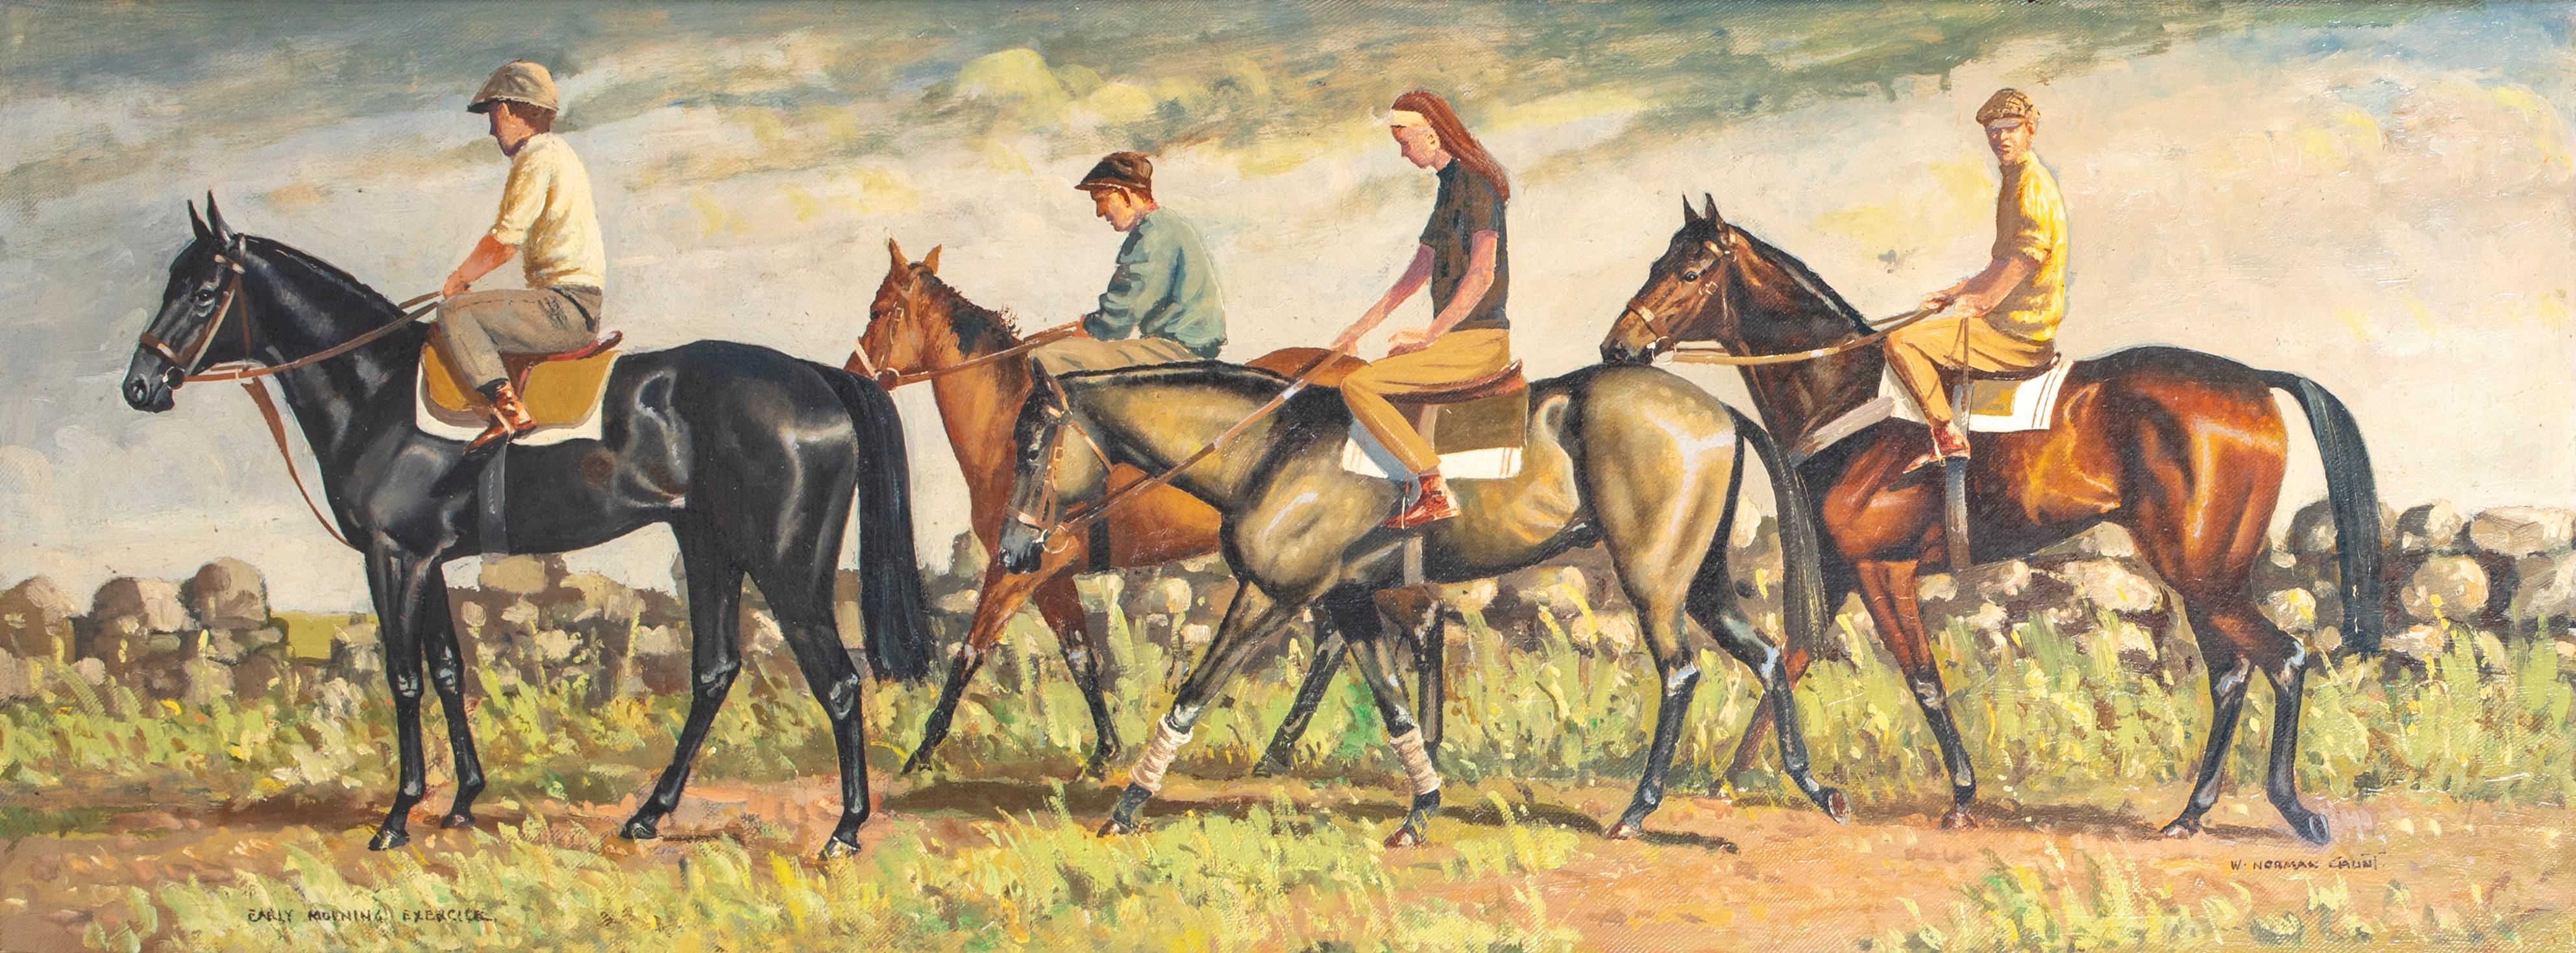 Morning Exercise, The Lumley Children, Jane, Richard & Friends, circa 1940's

by William Norman Gaunt FIAL, NDD (1918-2001)

Large early 20th Century scene of the Lumley Children and friends on the morning exercise with their horses, oil on board.